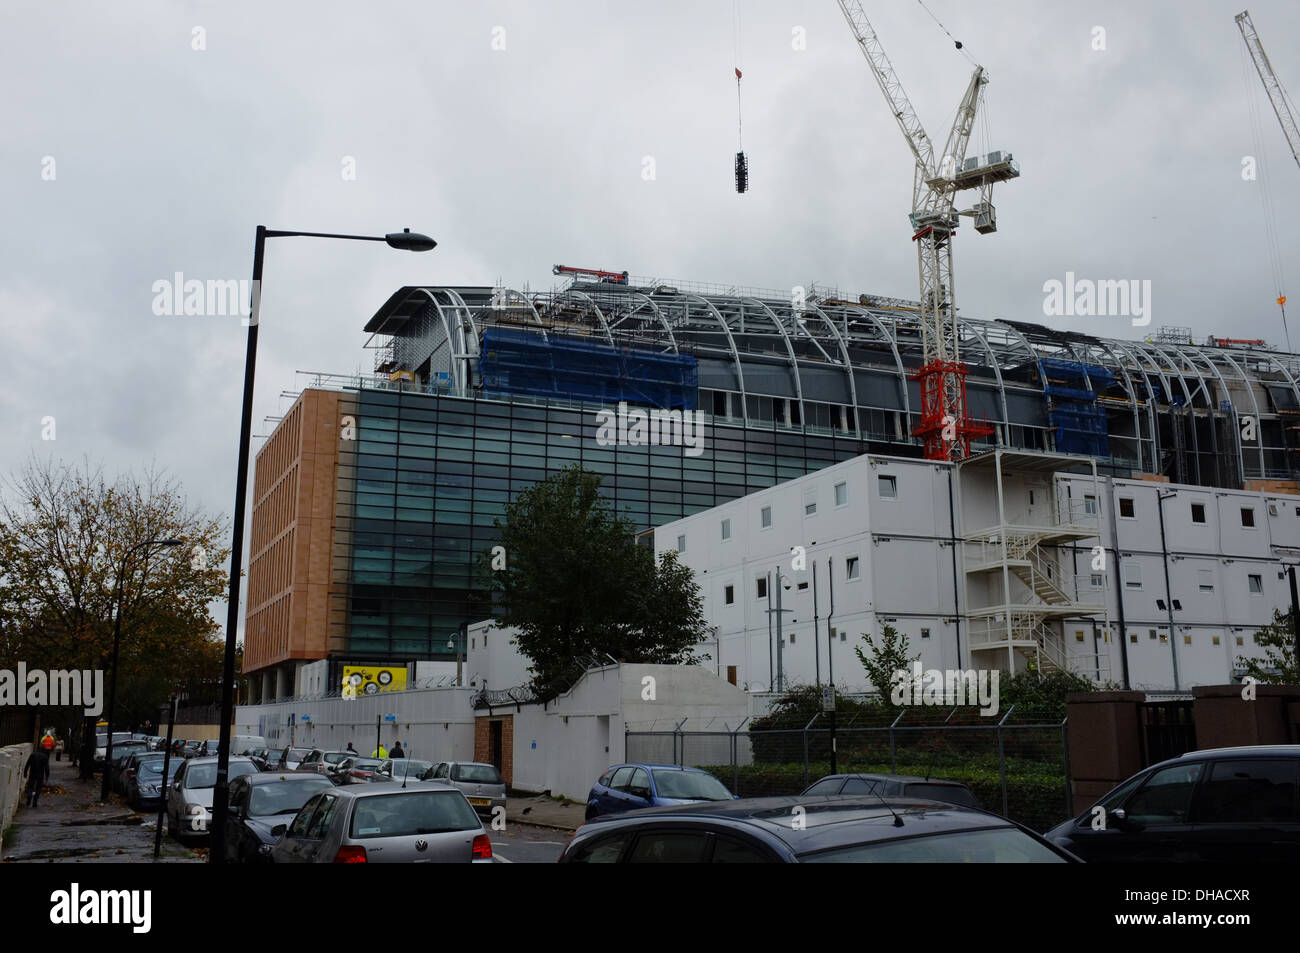 Construction of the new Francis Crick Institute in London's King's Cross UK - November 2013 Stock Photo